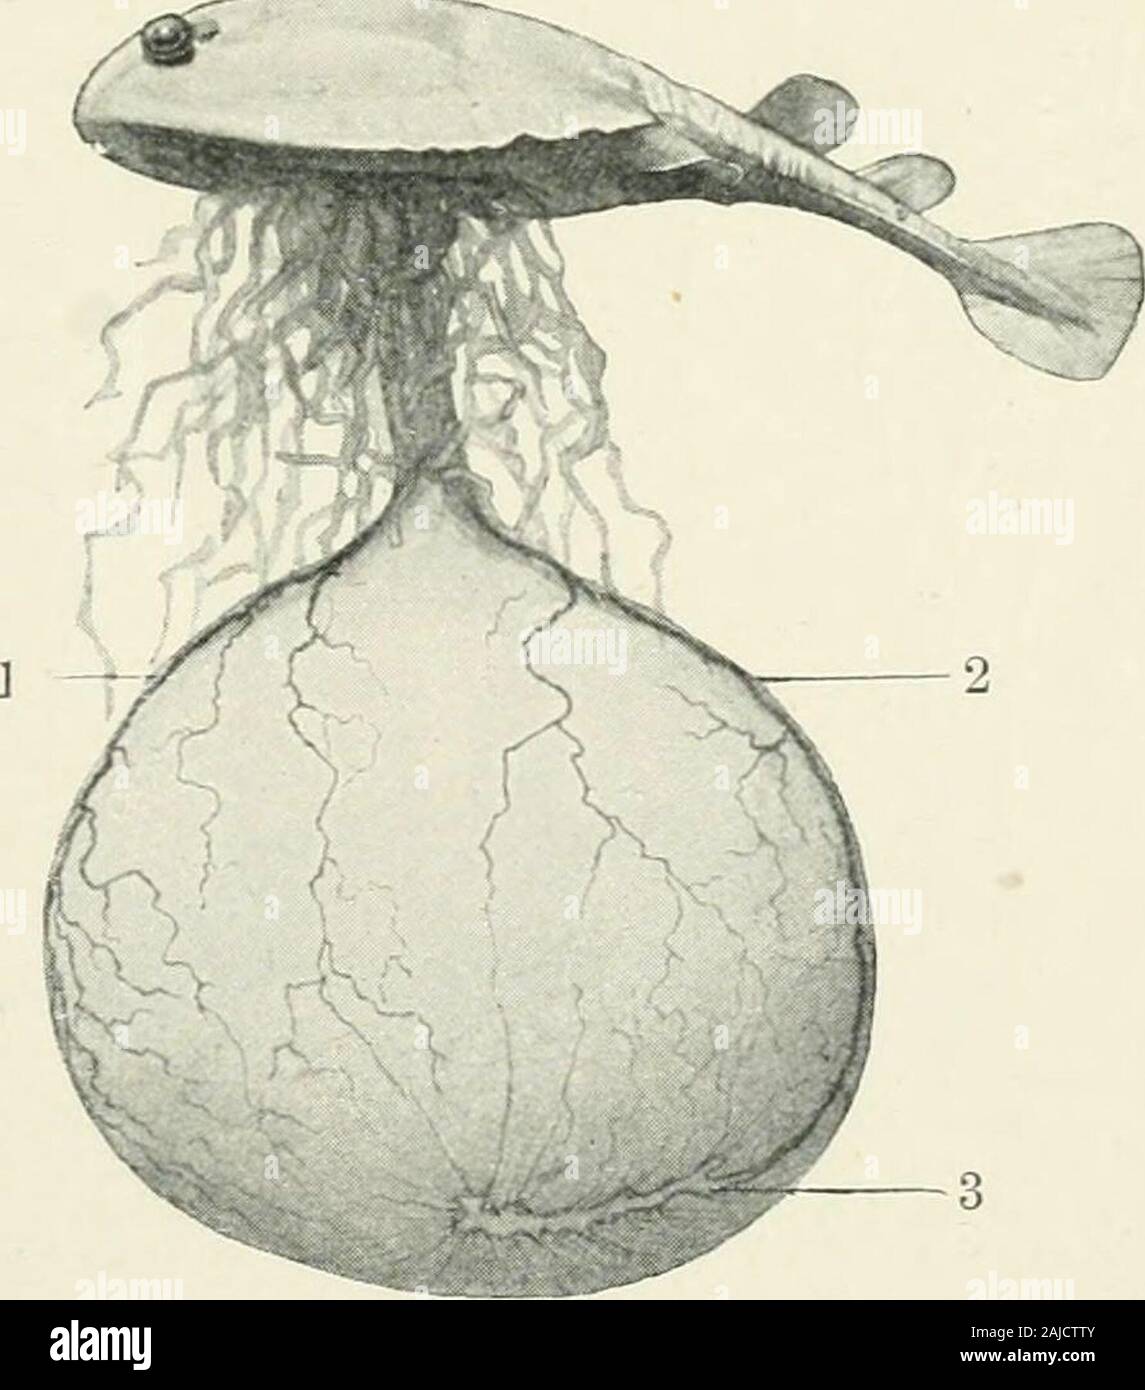 A treatise on zoology . Embryo of Gobius. (After Wencke-bach, from Hertwigs Handbiwh.) A,aorta ; //, heart; V.c.a, vena cardinalisanterior ; V.si, vena subintestinalis ; D.C,ductus Cuvieri. dermal fin-rays (derrao-trichia). An elaboratesystem of lateral-lineorgans extends over thehead and trunk. Theheart retains an un-divided atrium, andpumps venous blood intothe branchial lamellaeof the gill-arches. Notmore than eight gill-slitsare pierced, of which thefirst is the relatively-small spiracle. As char-acters which are con-sidered primitive, butare often lost throughspecialisation, may bemention Stock Photo